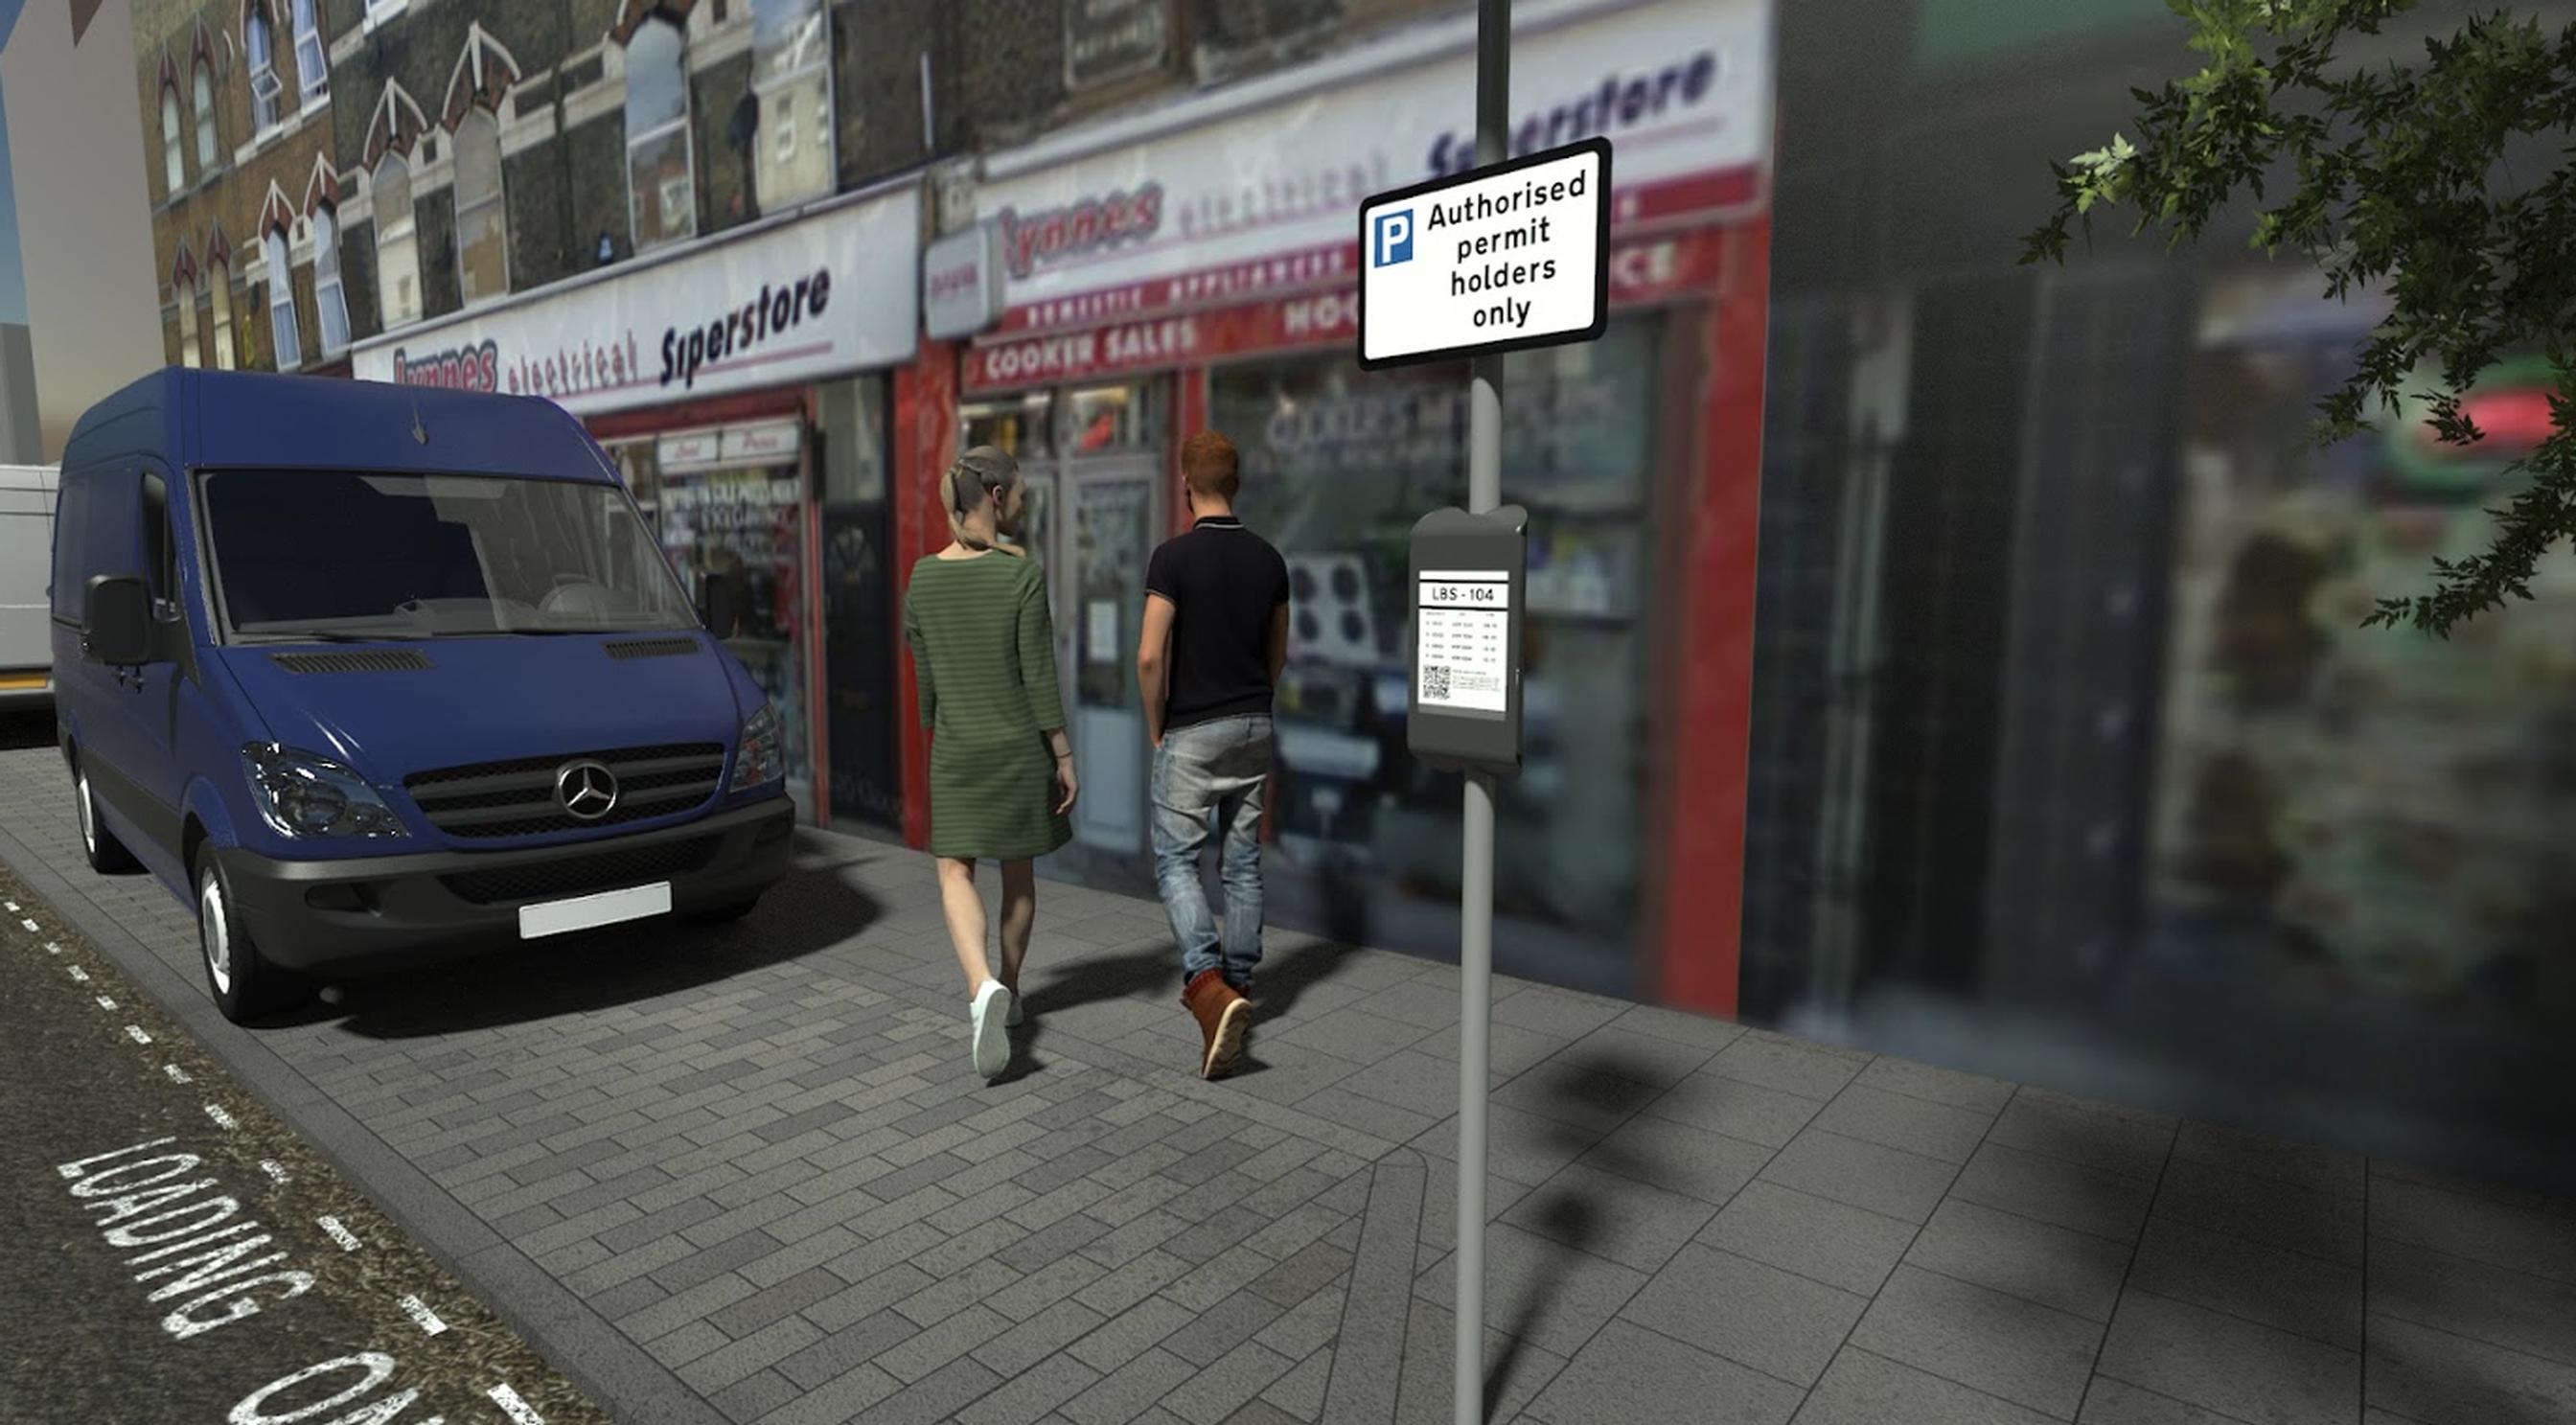 The Kerb system enables restricted kerbside loading bays to become pre-bookable through a digital platform allowing the city to flex its use of restricted kerbspace